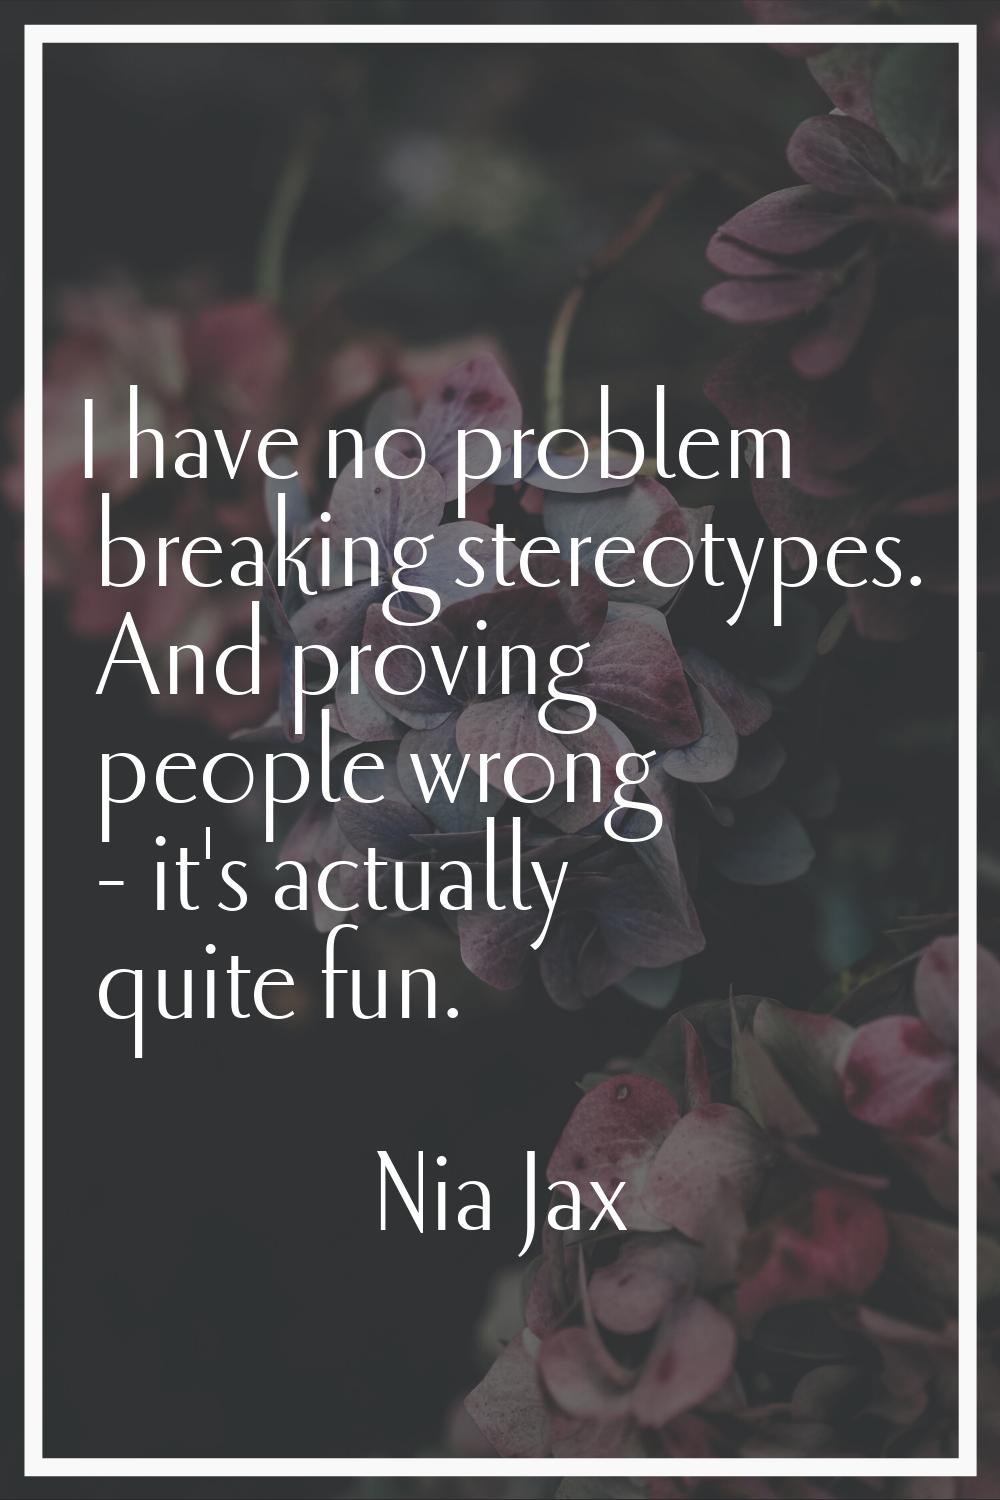 I have no problem breaking stereotypes. And proving people wrong - it's actually quite fun.